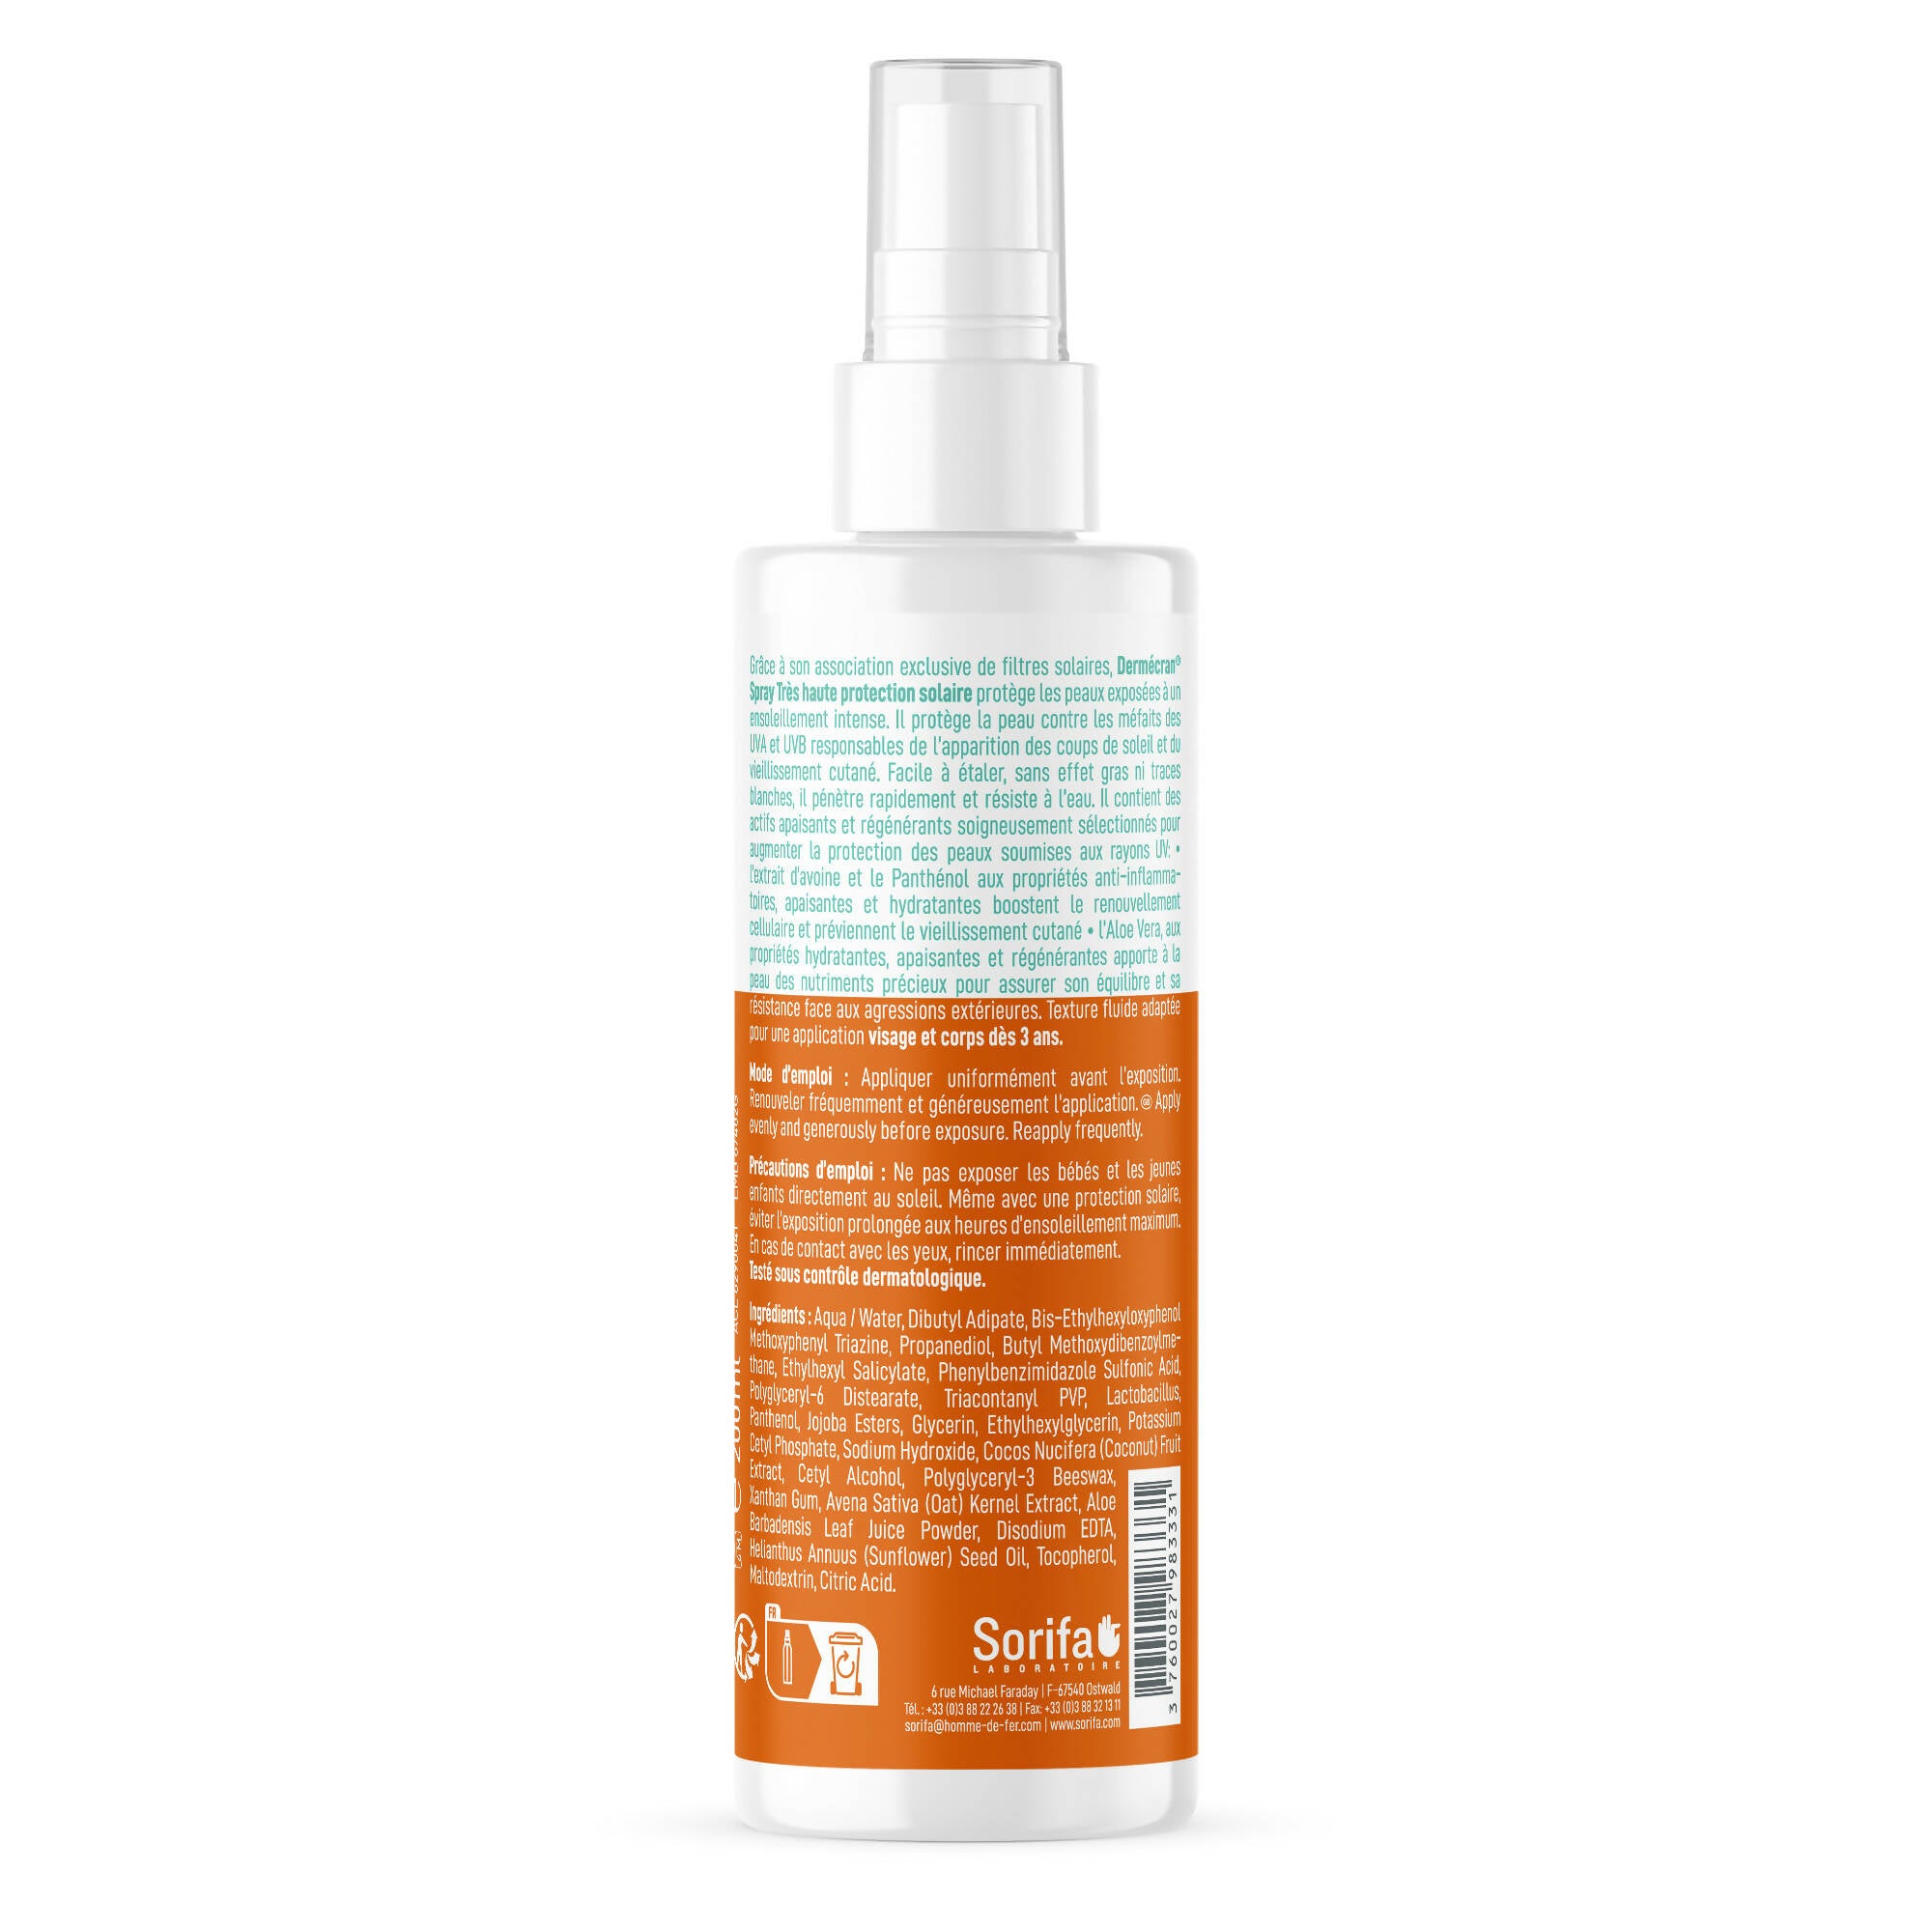 SORIFA - Dermscreen - SPF50+ sun spray - Face and body - Ocean Friendly formula - Water resistant - For the whole family from 3 years old - Made in France - 200 ml spray - 0